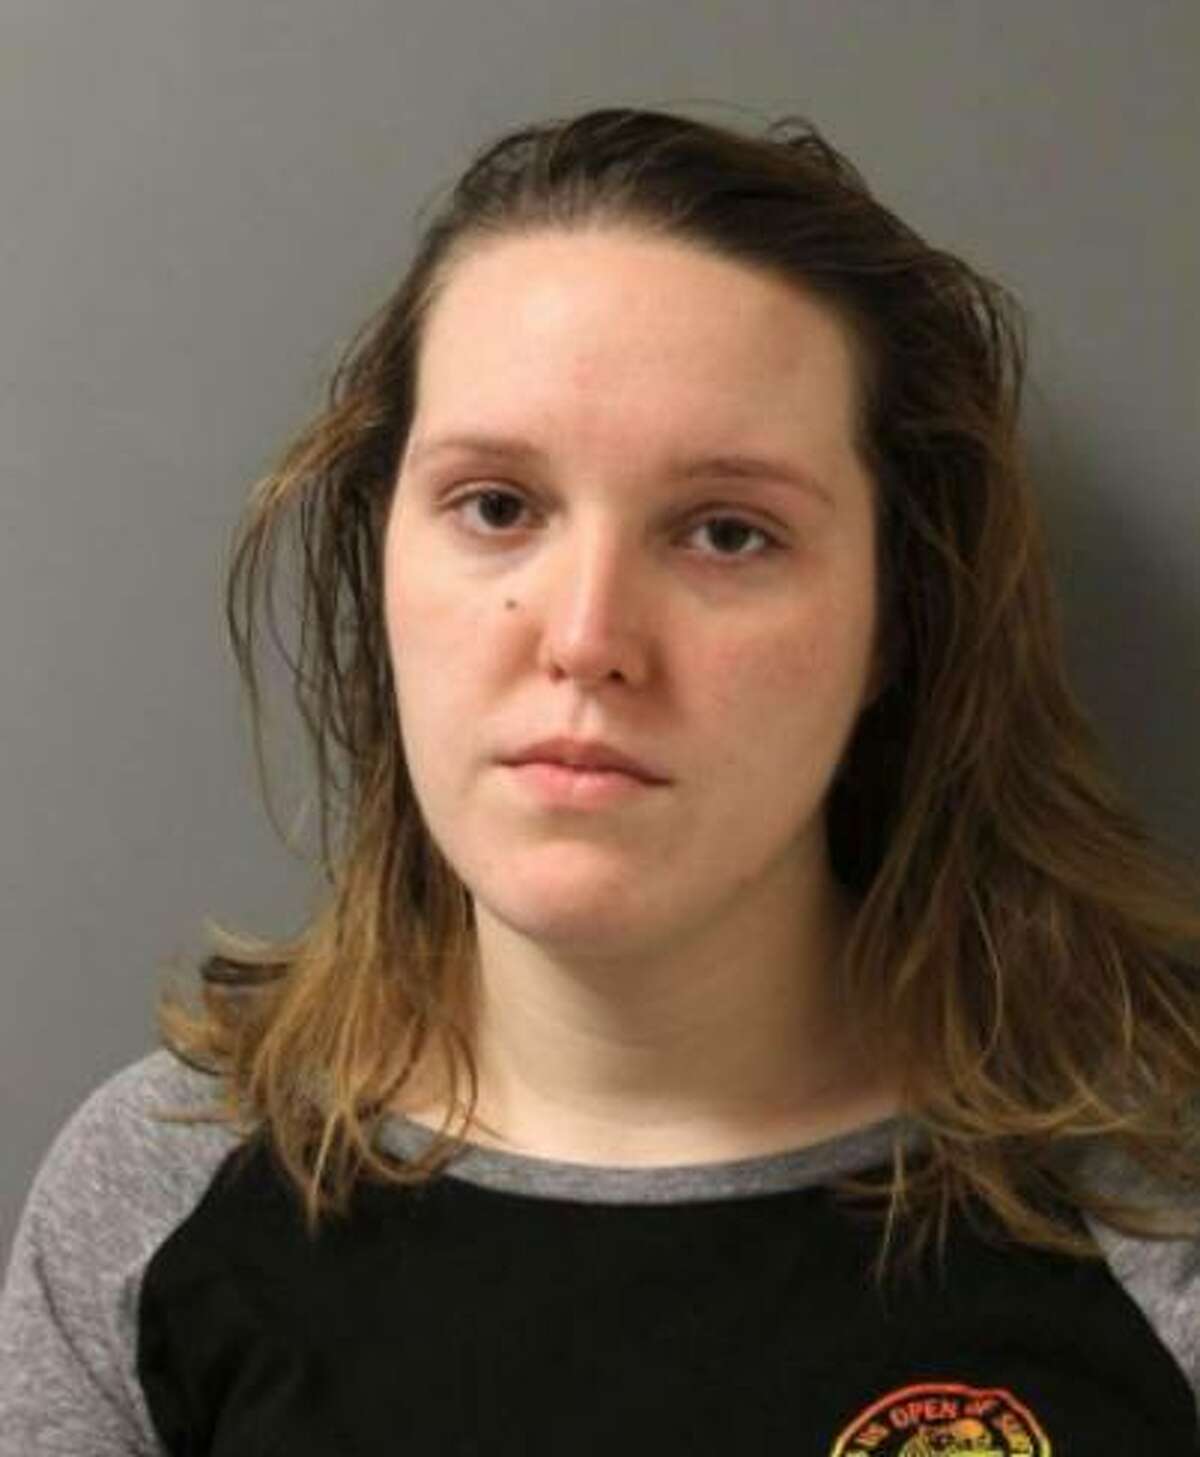 Michelle Schiffer, 24, pleaded guilty to an improper relationship with a student on May 7, 2018.